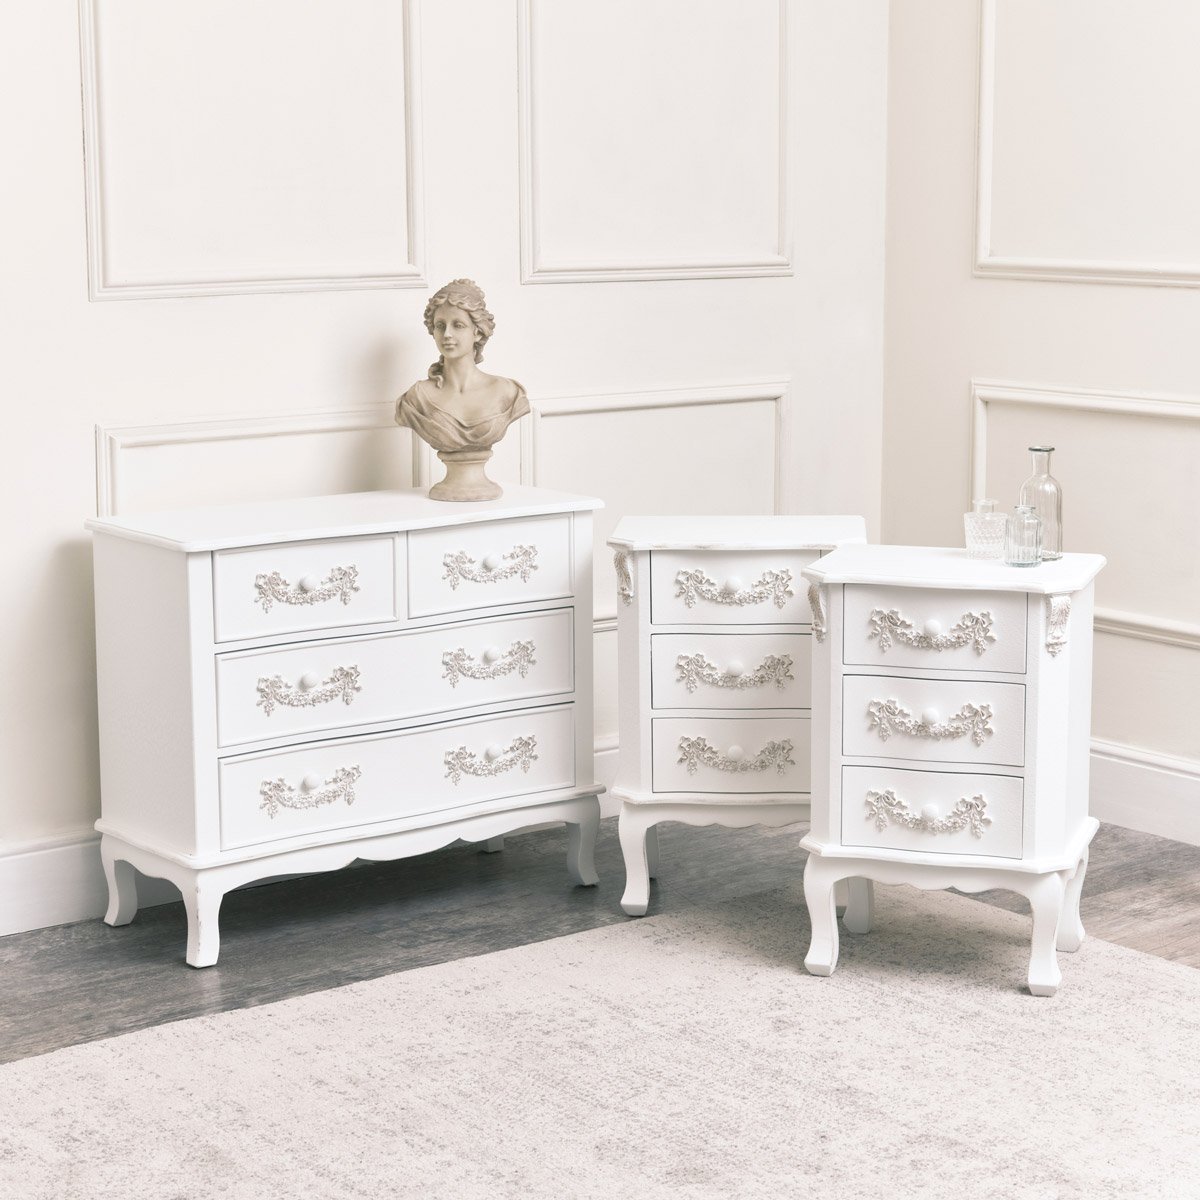 Antique White 4 Drawer Chest of Drawer & Pair of 3 Drawer Bedside Tables - Pays Blanc Range 